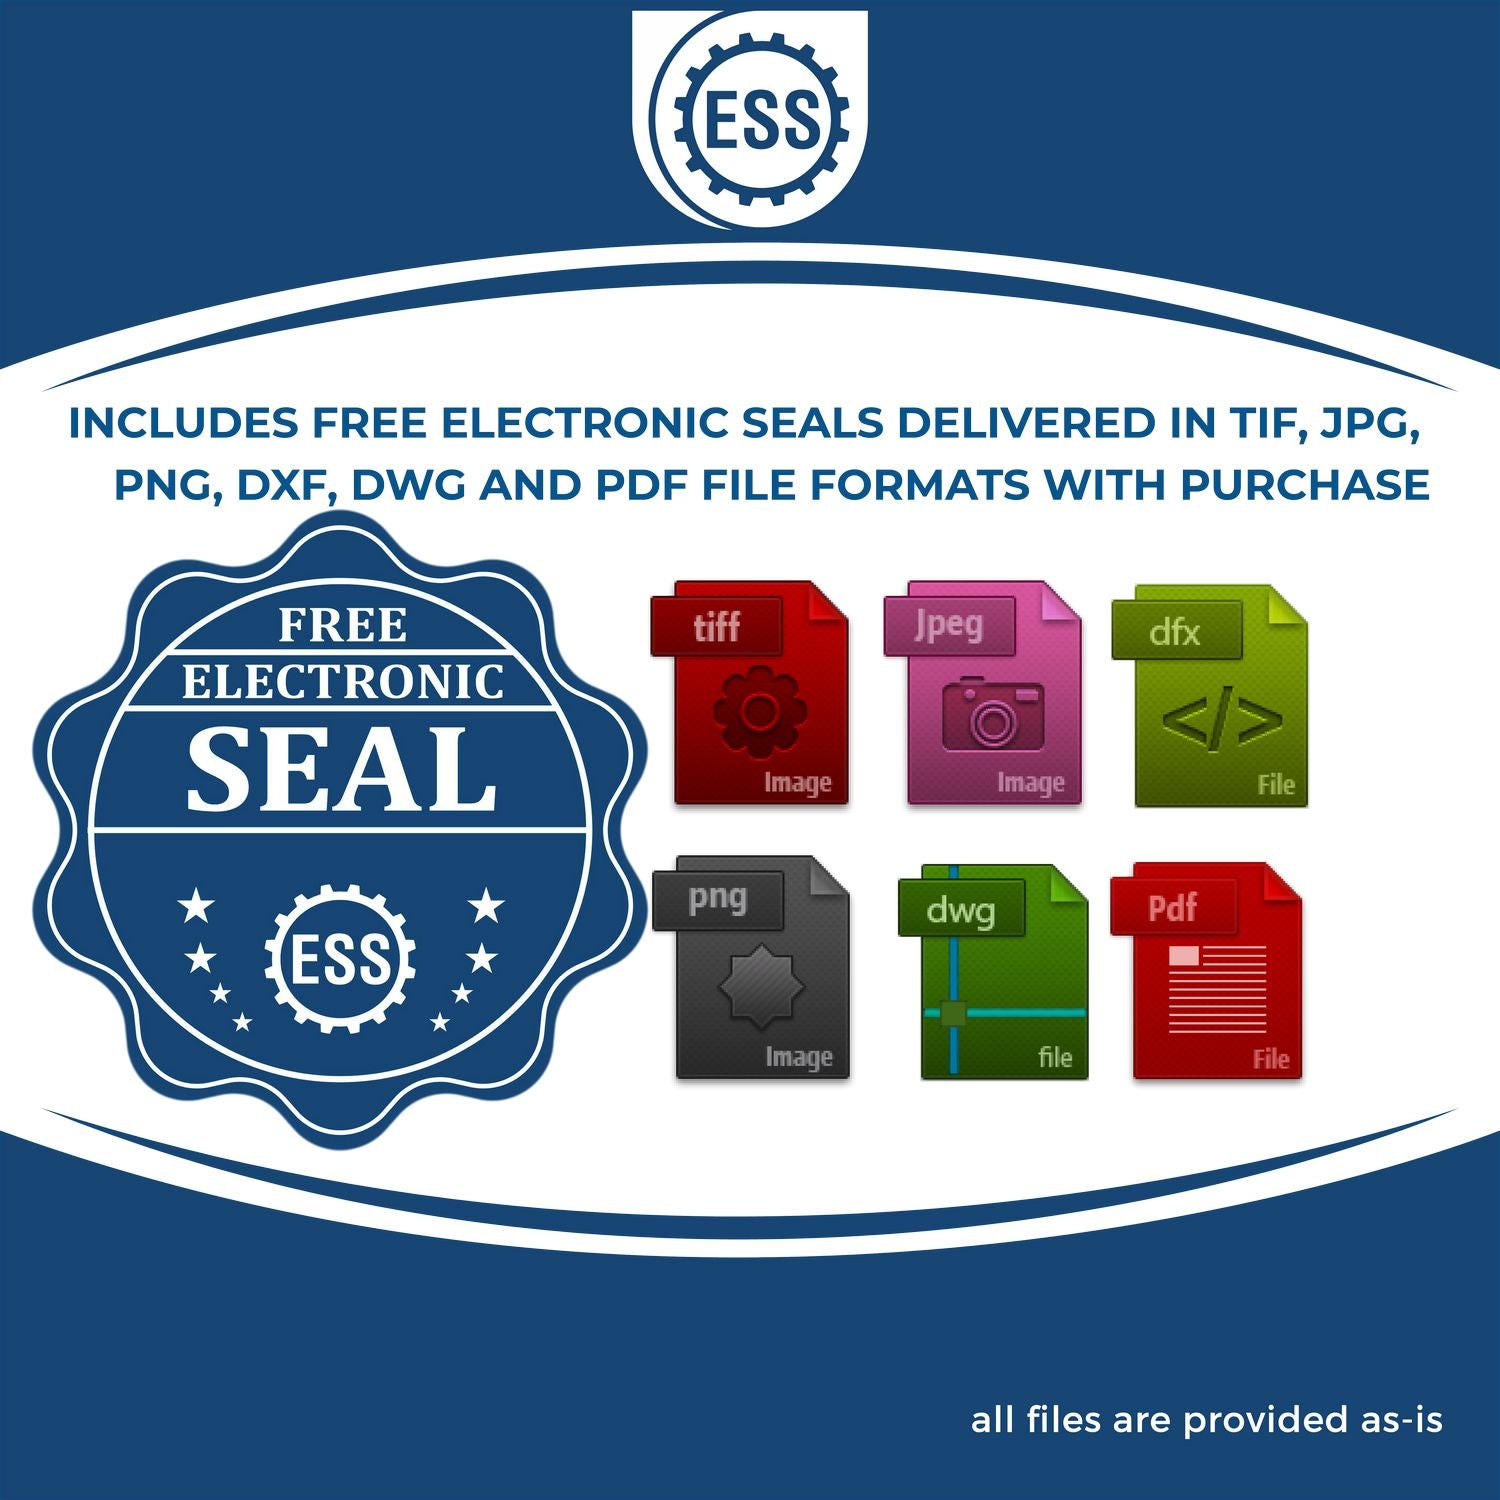 An infographic for the free electronic seal for the Heavy Duty Cast Iron Virginia Land Surveyor Seal Embosser illustrating the different file type icons such as DXF, DWG, TIF, JPG and PNG.